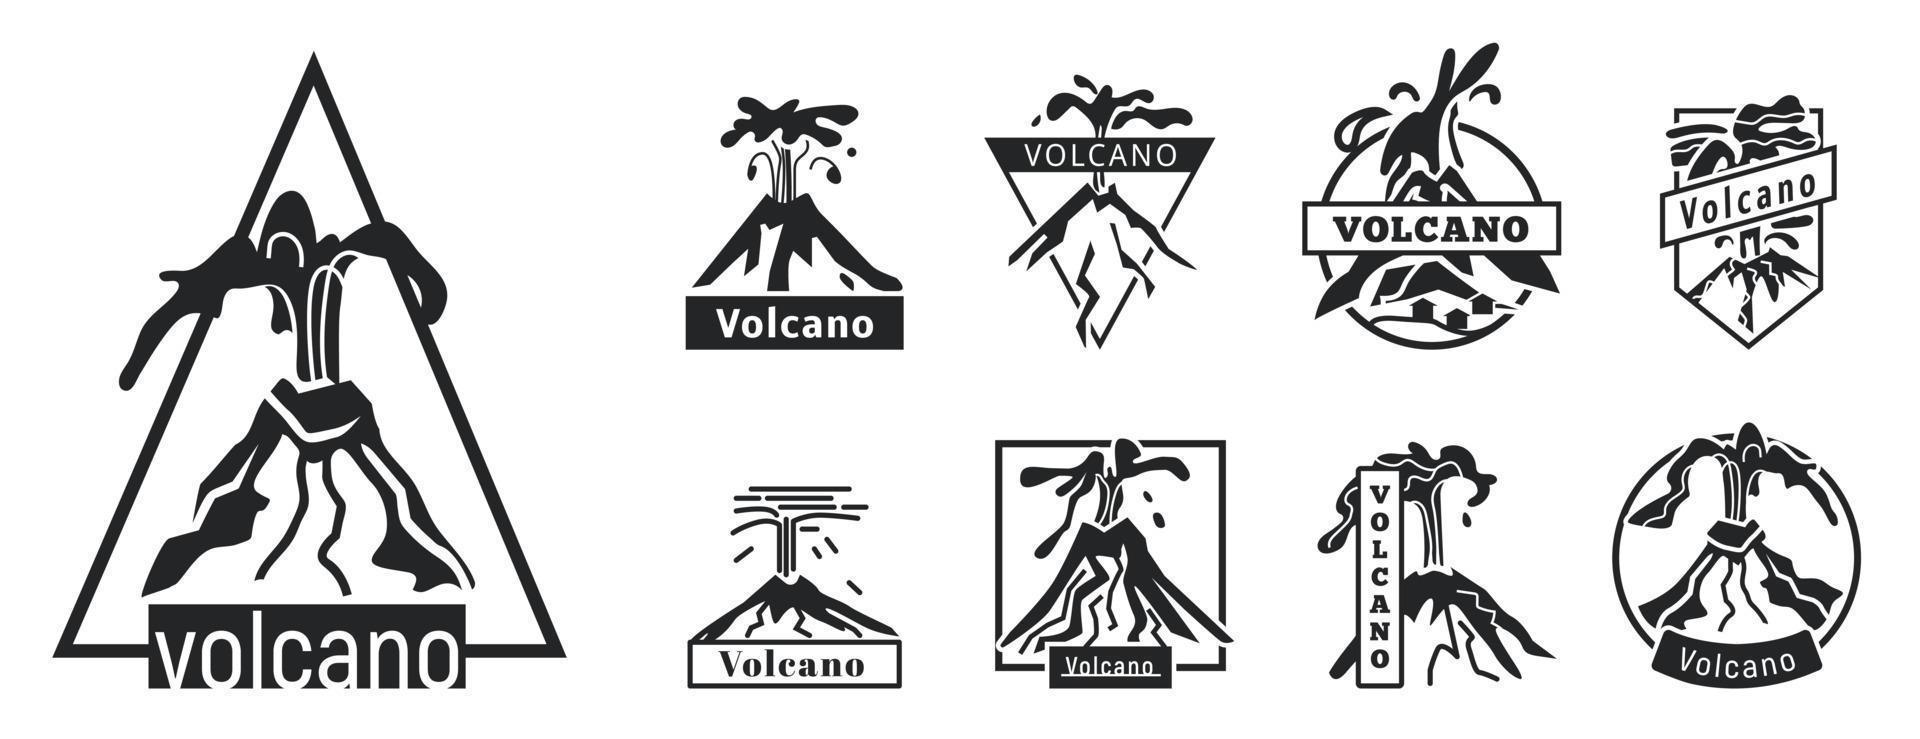 Volcano icons set, simple style vector